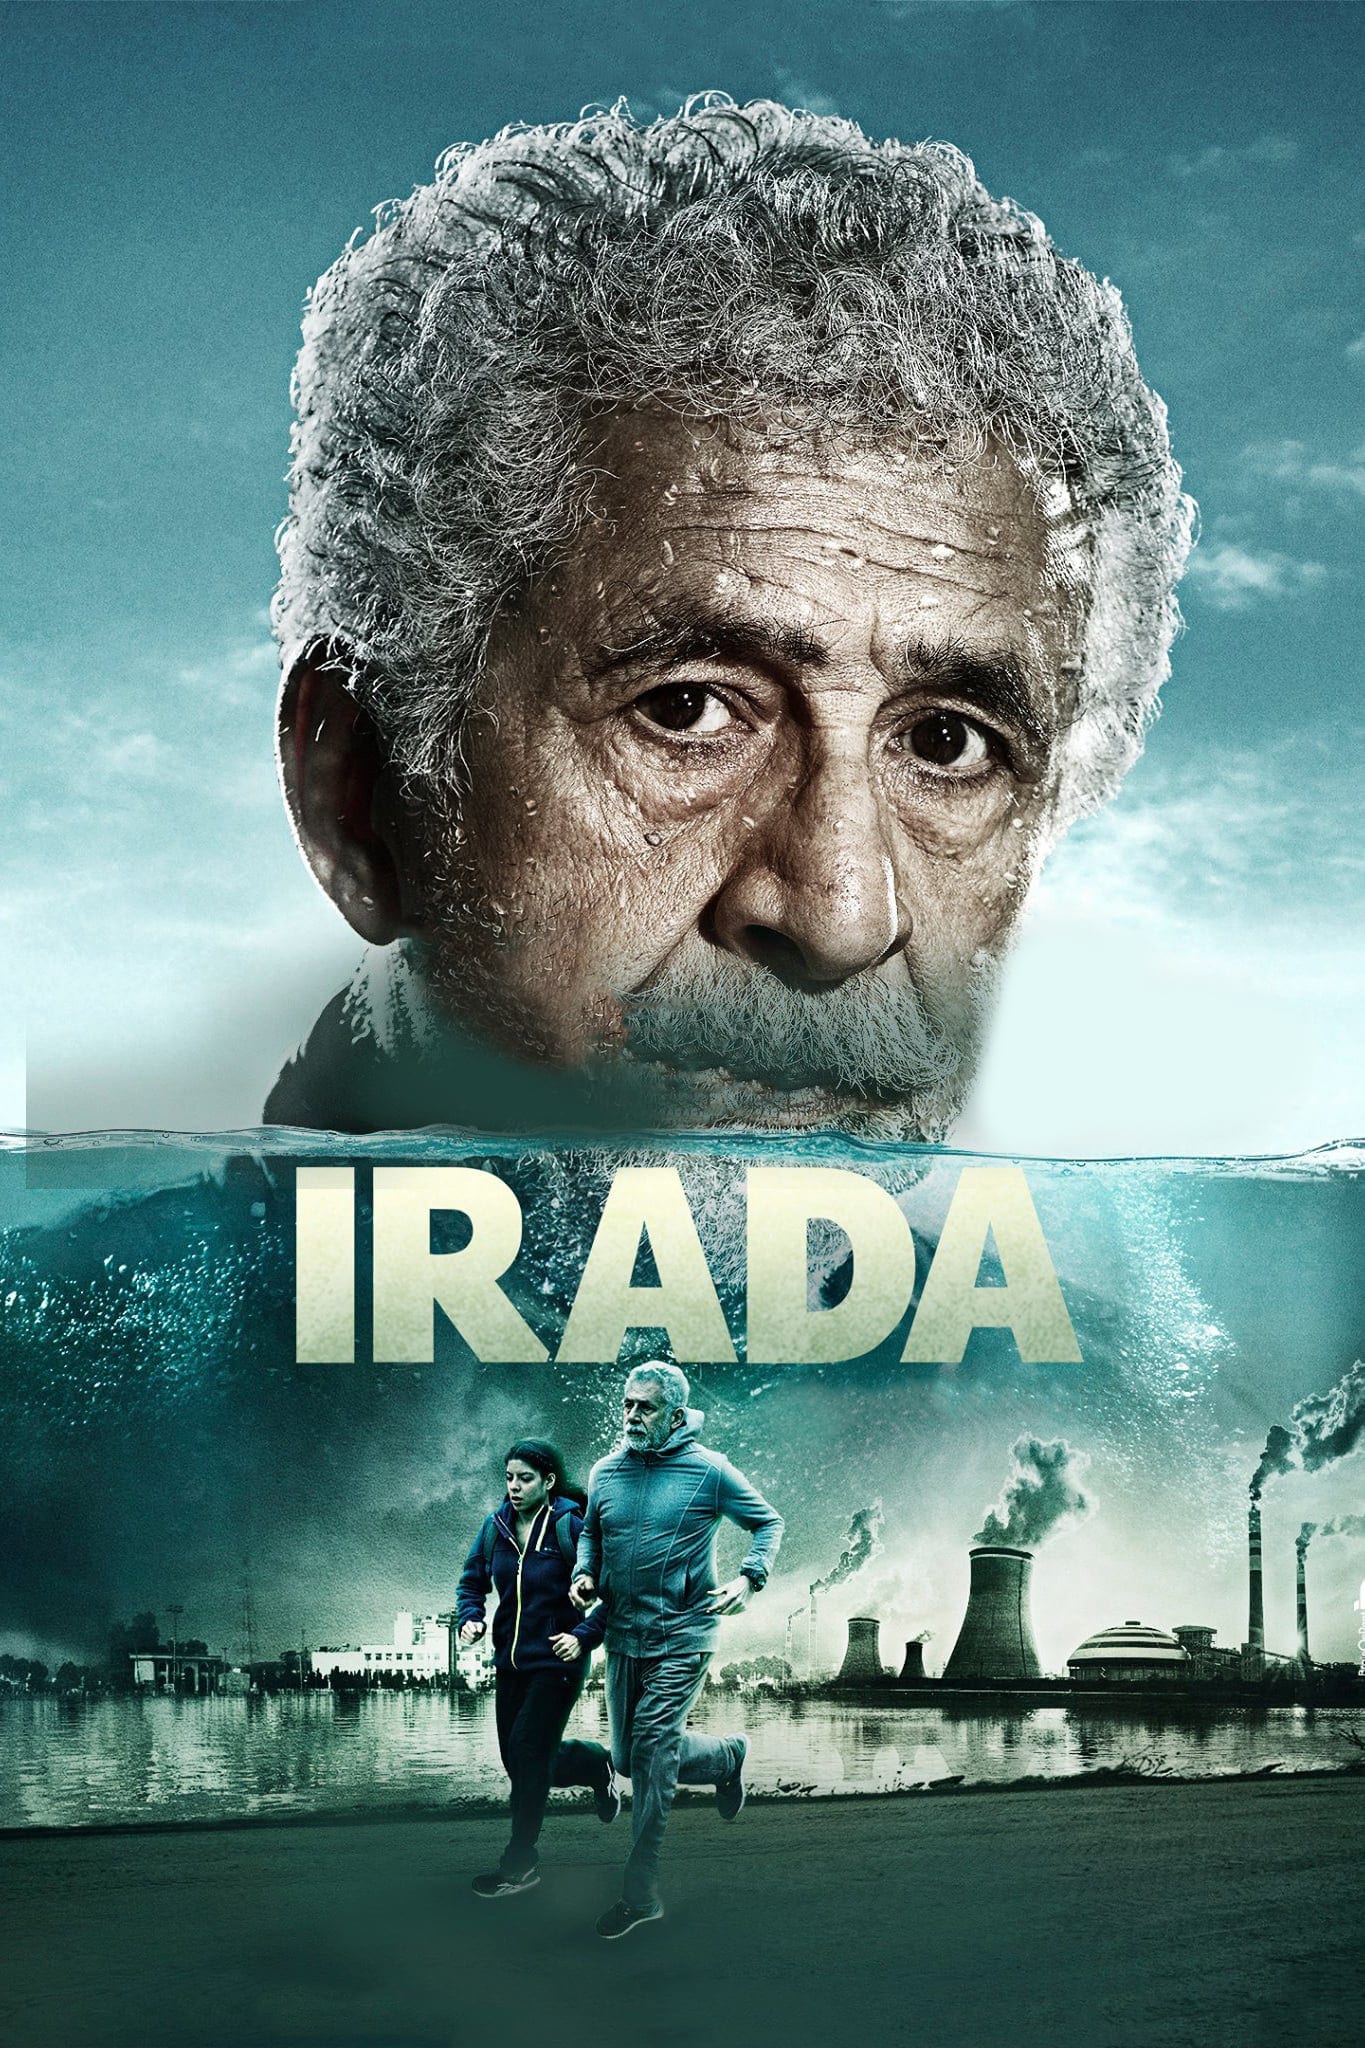 Poster for the movie "Irada"